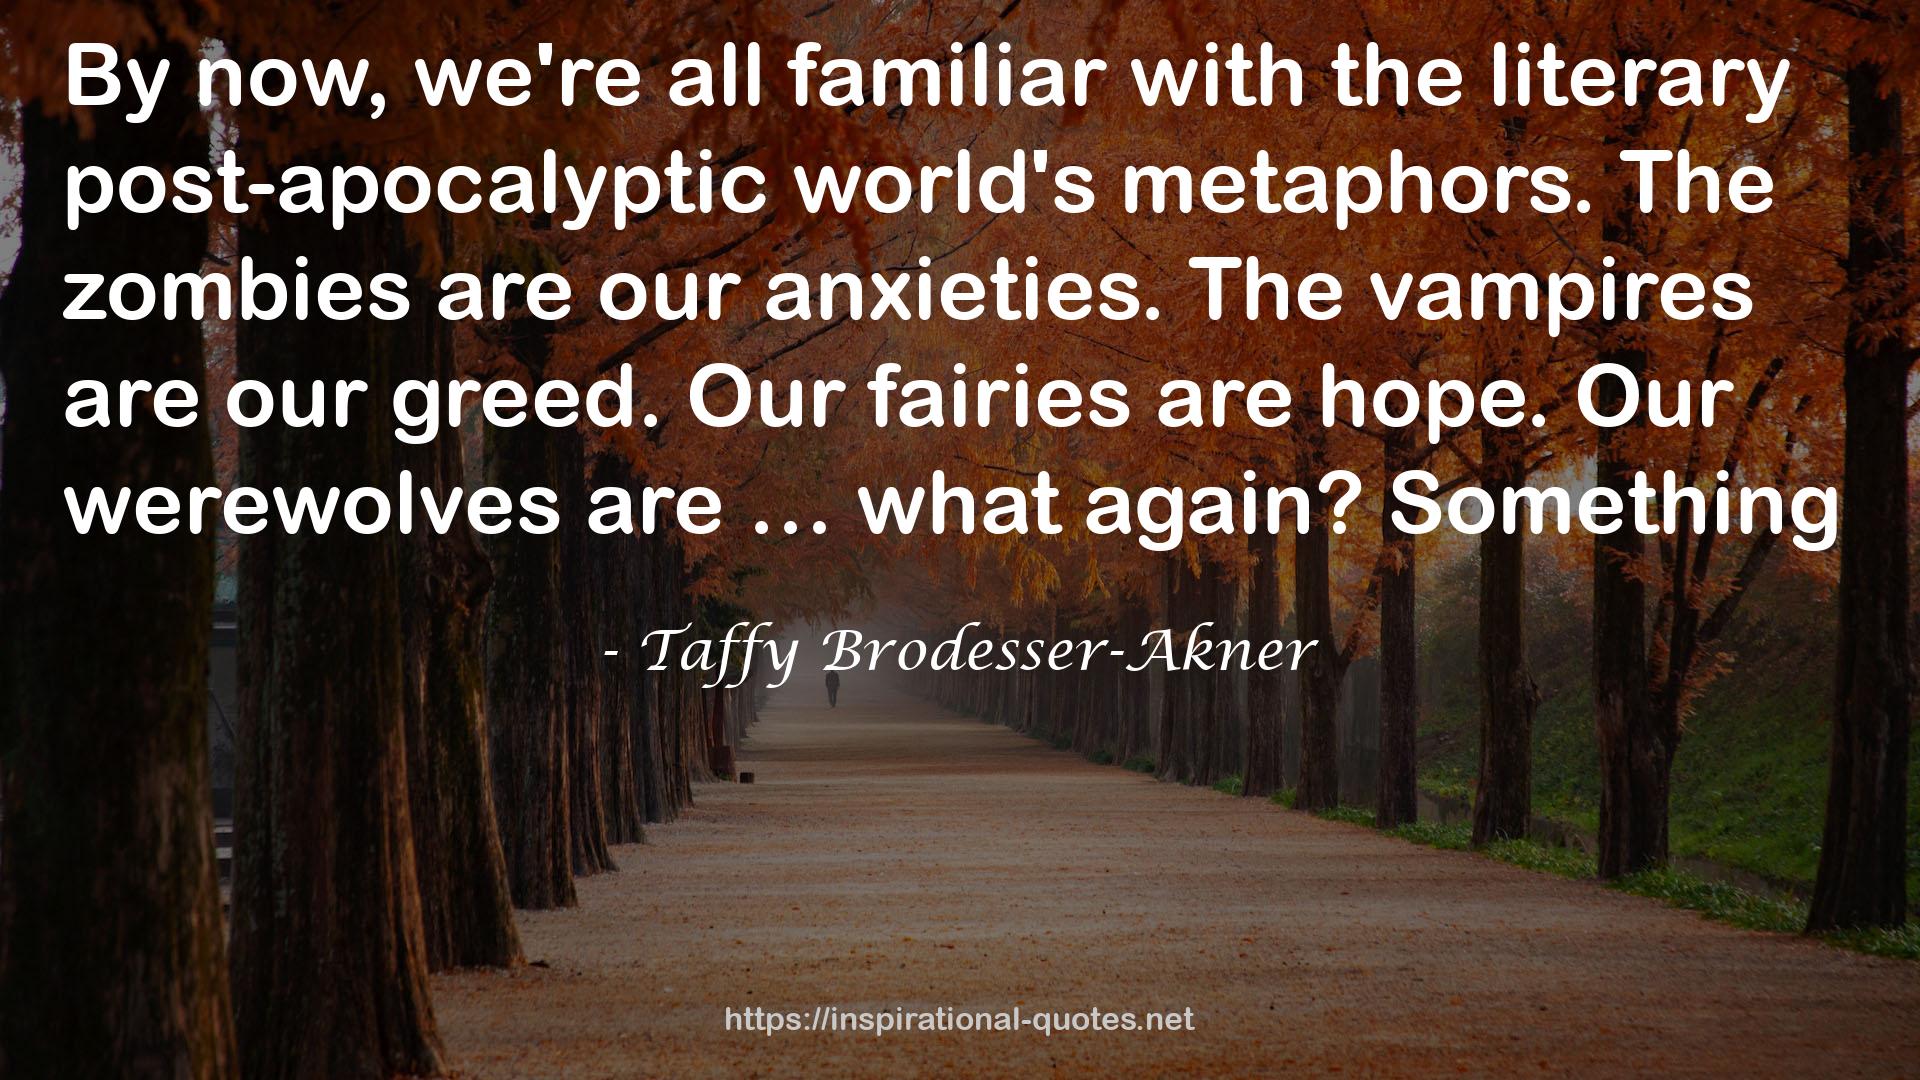 Taffy Brodesser-Akner QUOTES